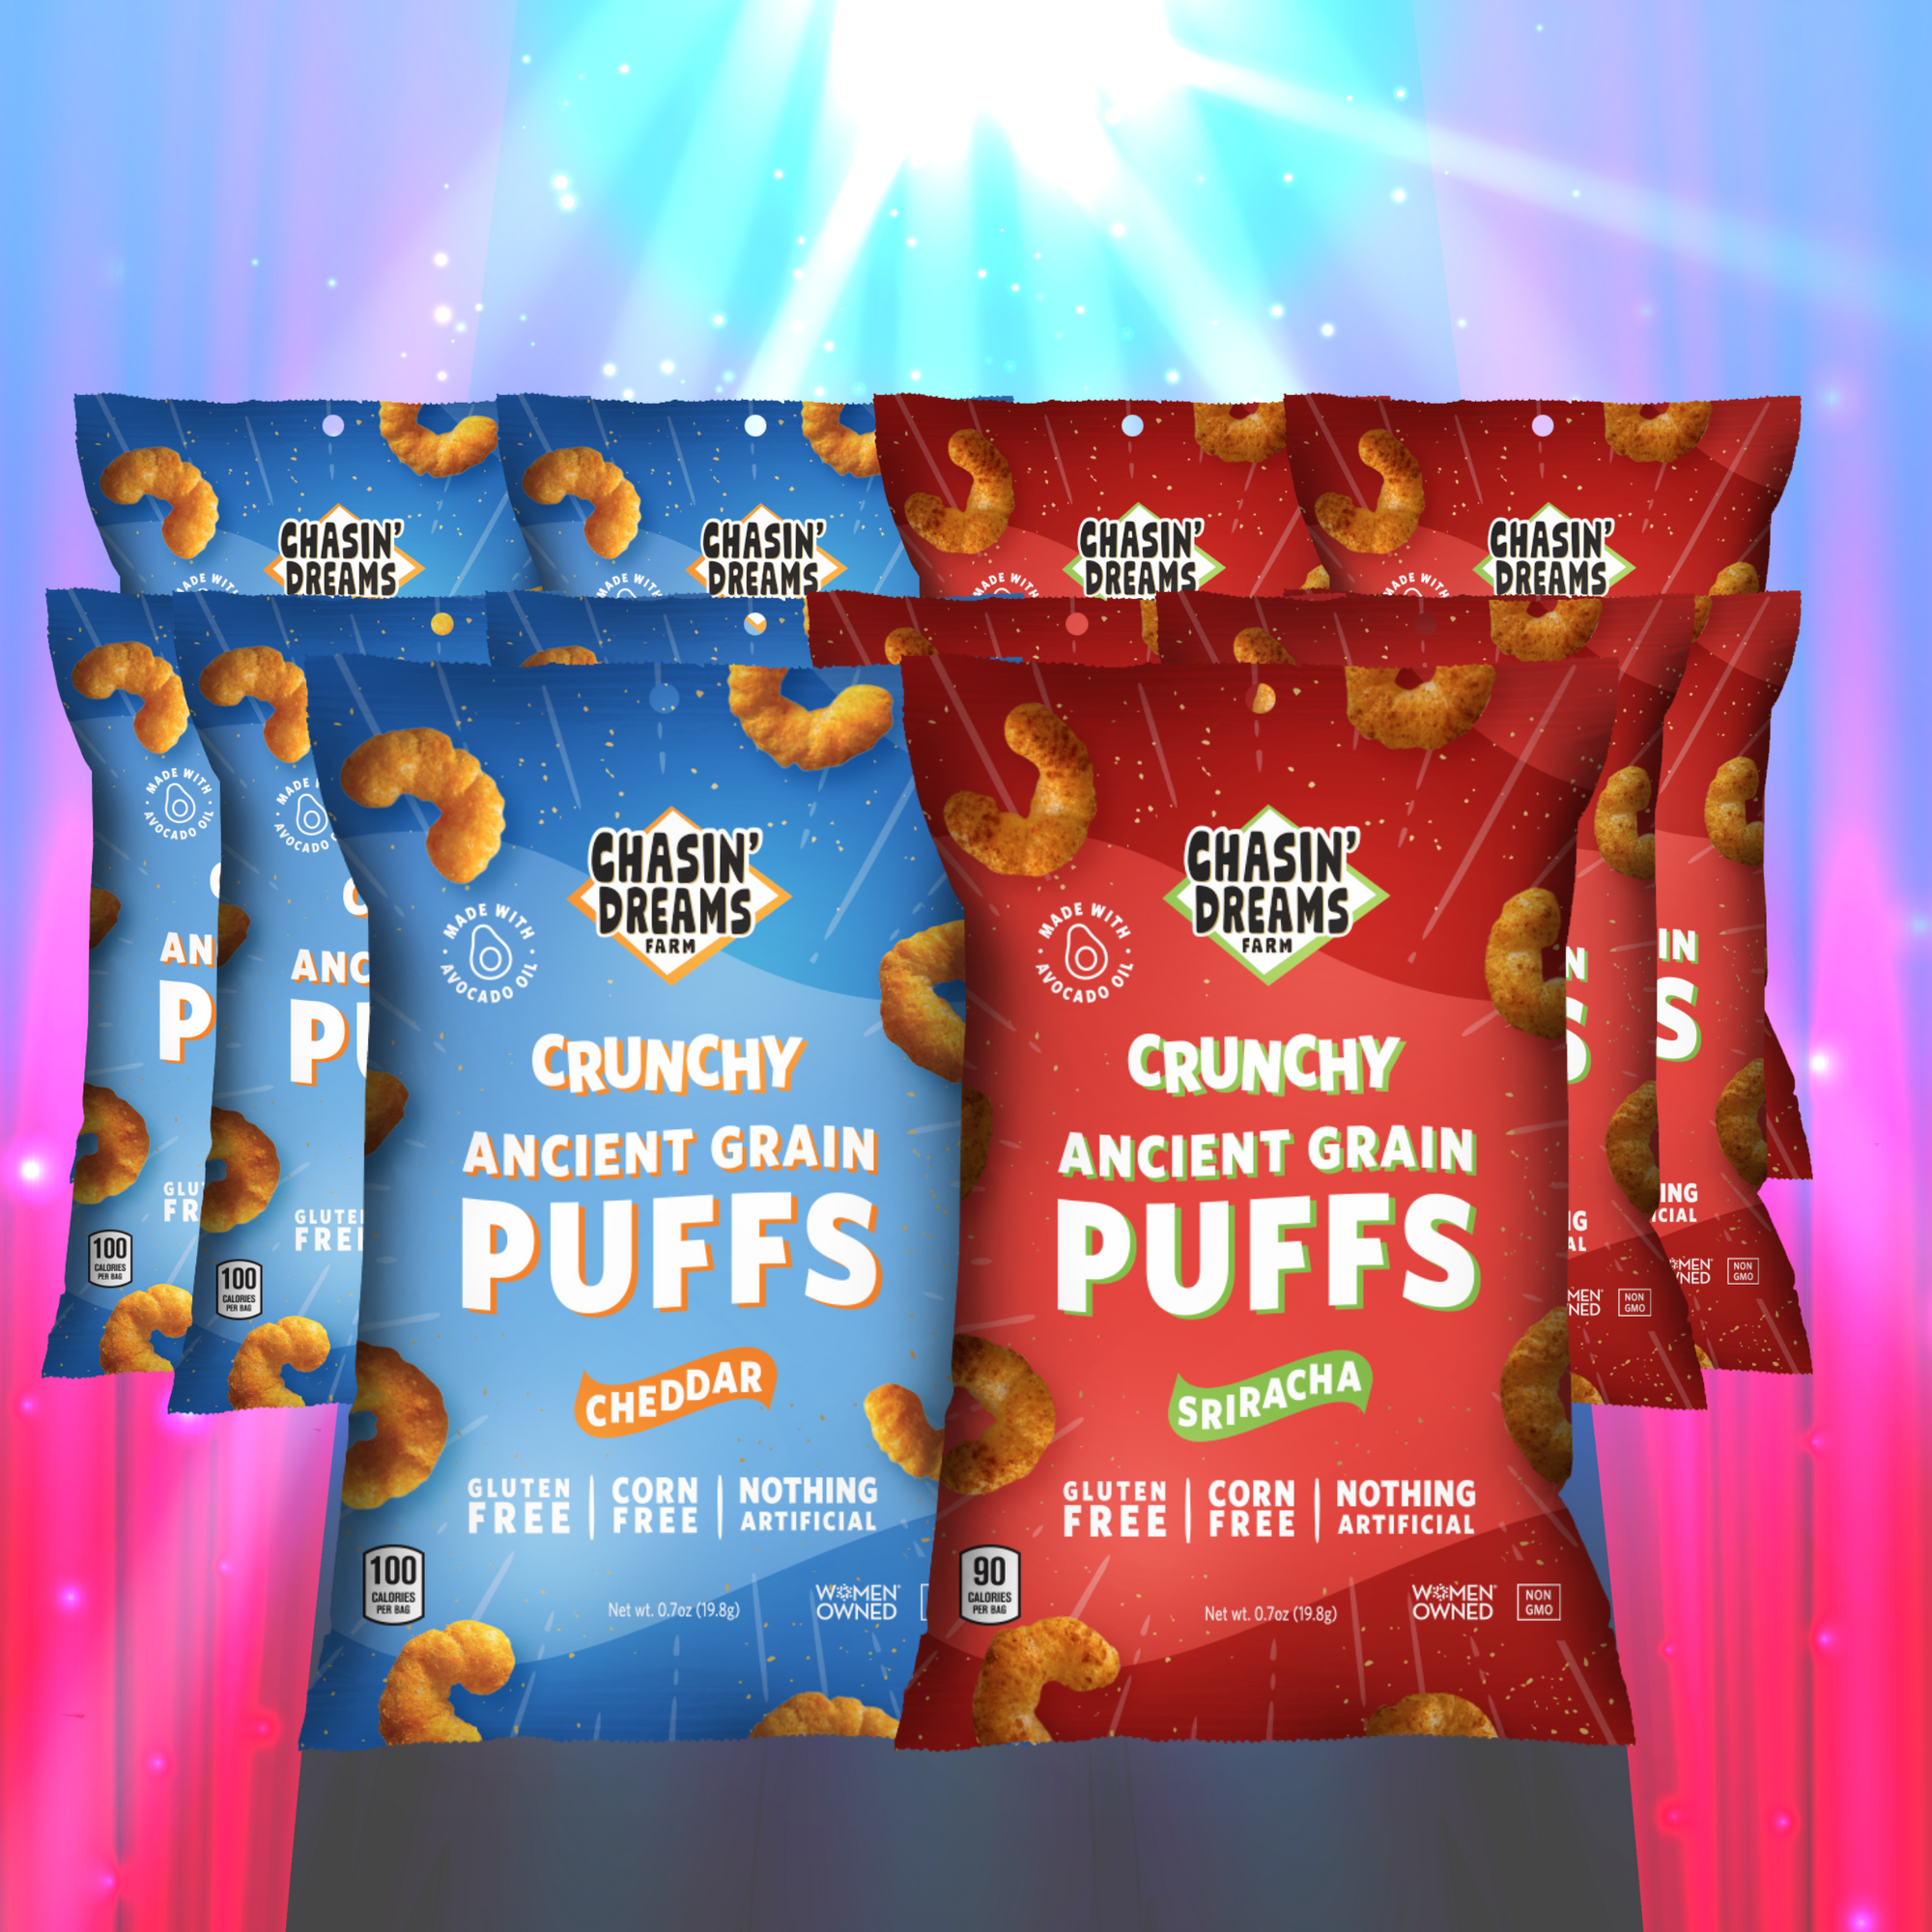 Six blue bags of Crunchy Ancient Grain Puffs Cheddar and six red bags of Crunchy Ancient Grain Puffs Sriracha on a blue and red background with a spotlight.